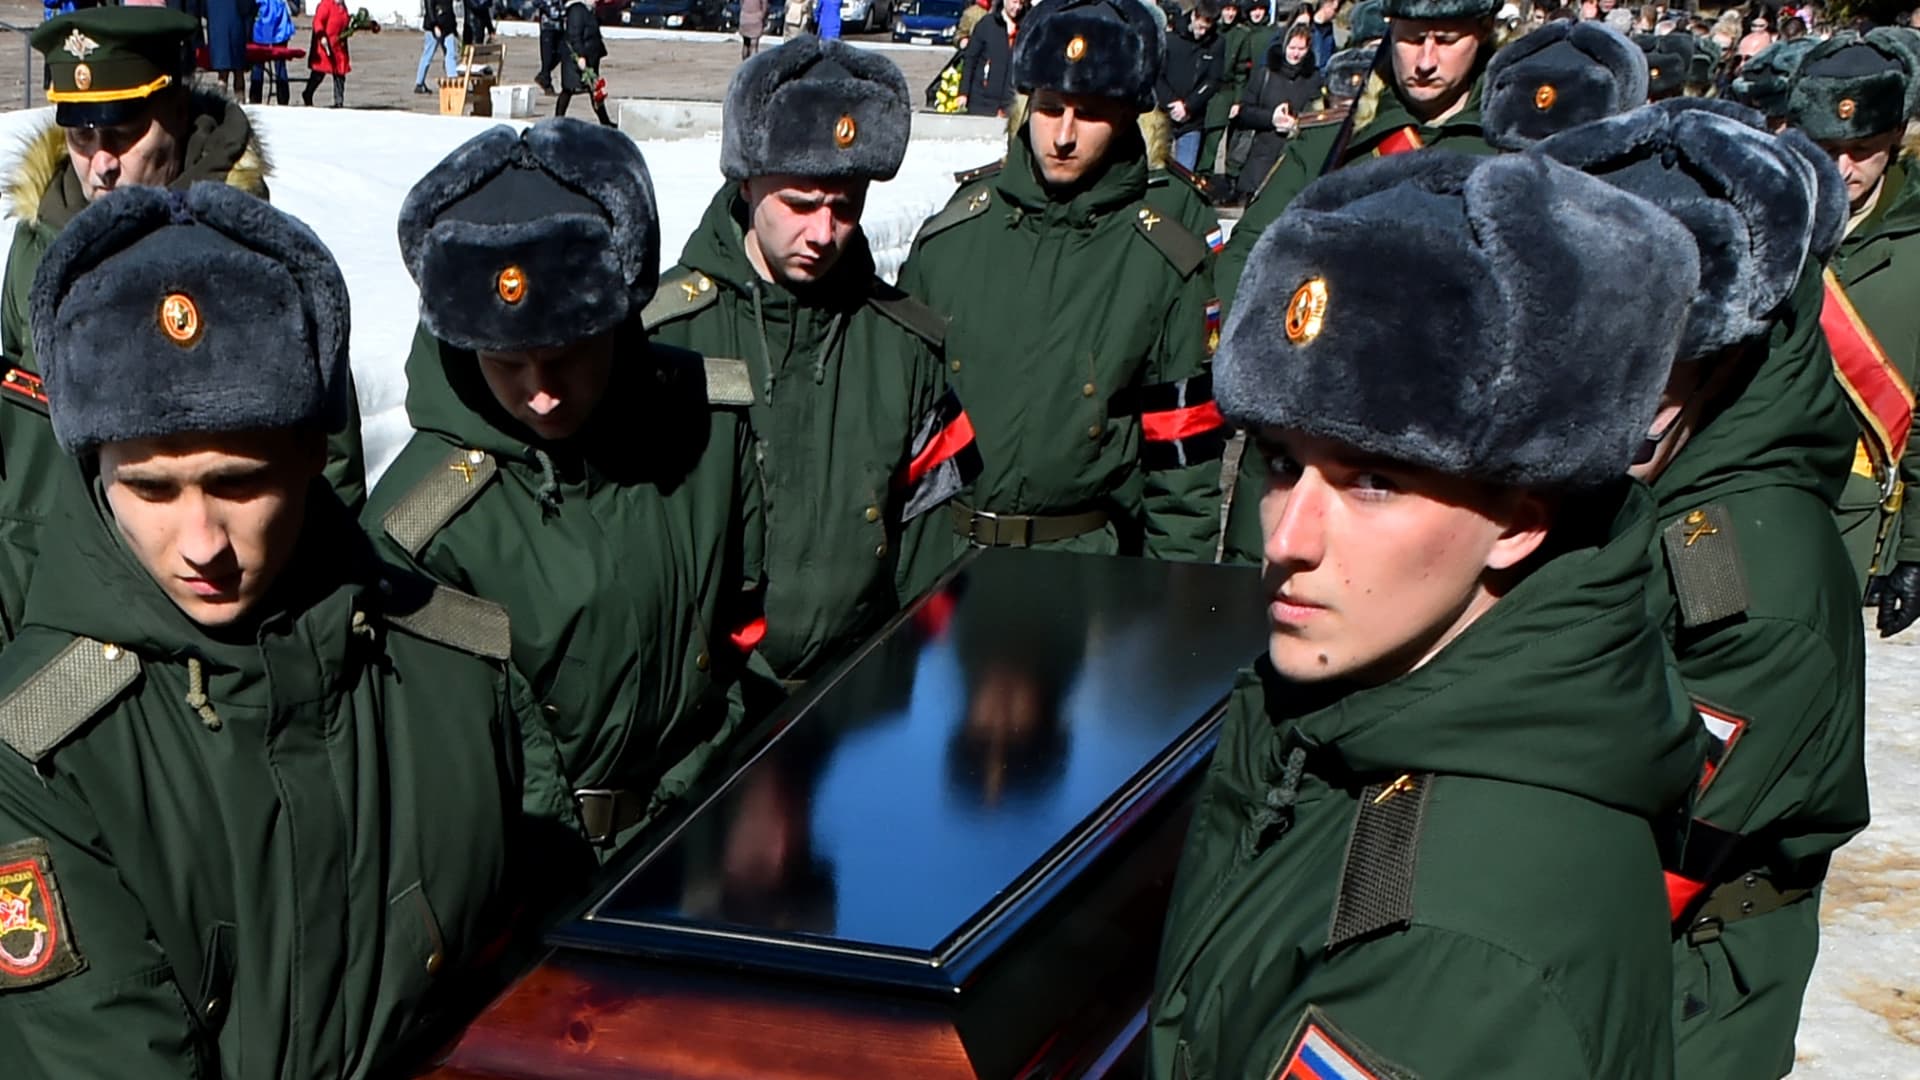 Soldiers carry a coffin of 20-year-old Russian serviceman Nikita Avrov, during his funeral at a church in Luga some 150kms south of Saint Petersburg on April 11, 2022, after his death on March 27, during the ongoing Russian invasion of Ukraine.